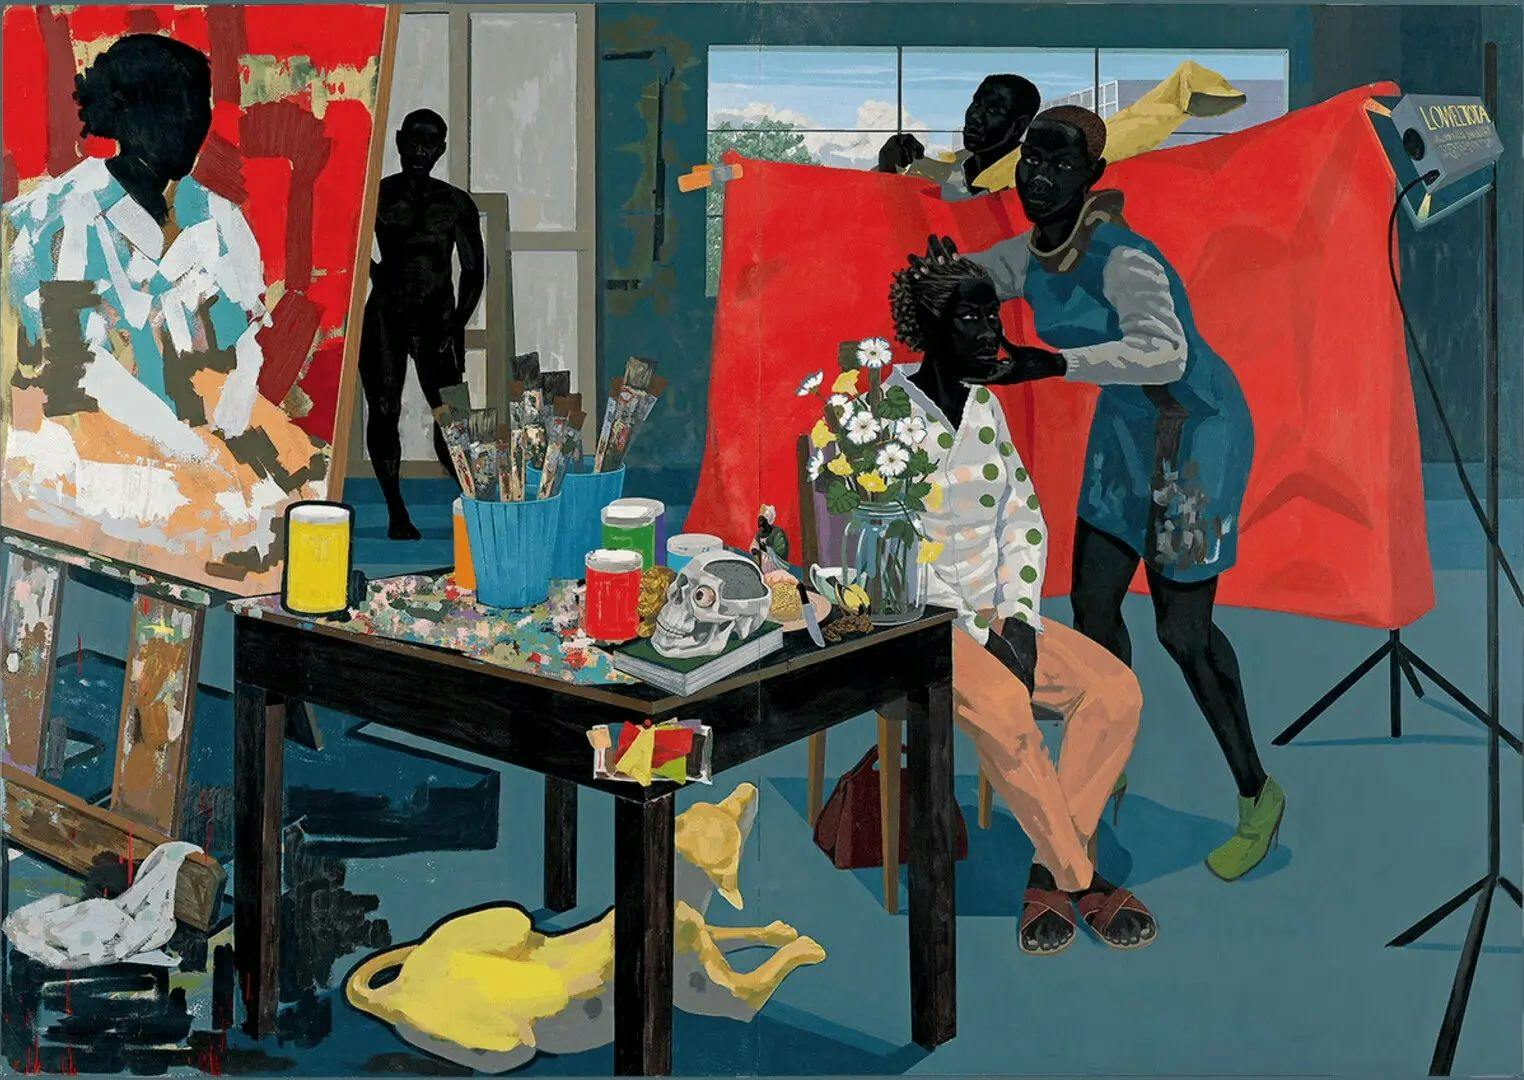 A painting by Kerry James Marshall, titled Untitled (Studio)